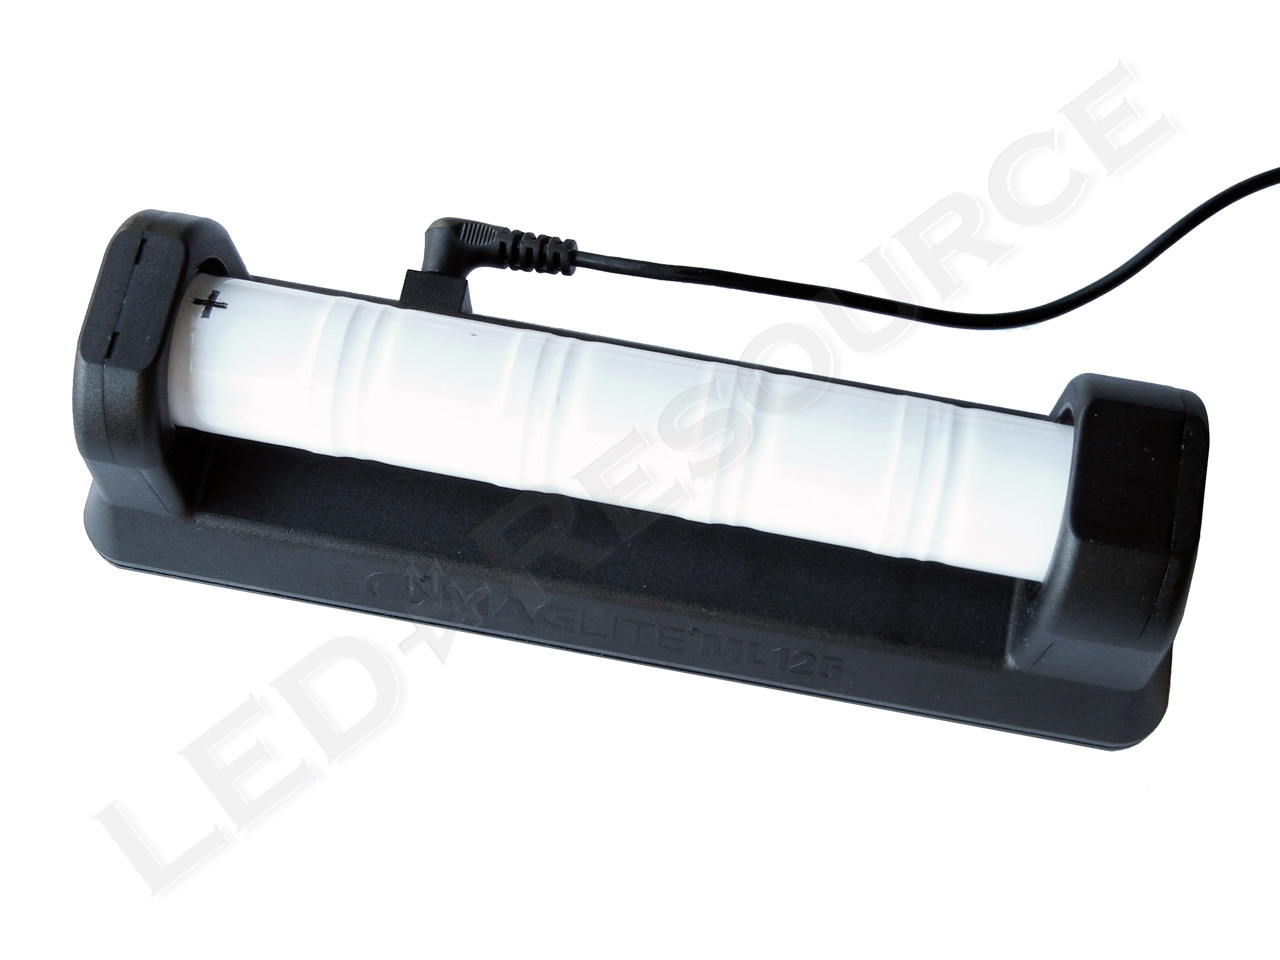 Lampe torche LED MAGLITE CHARGER ML125 - Rechargeable 220V